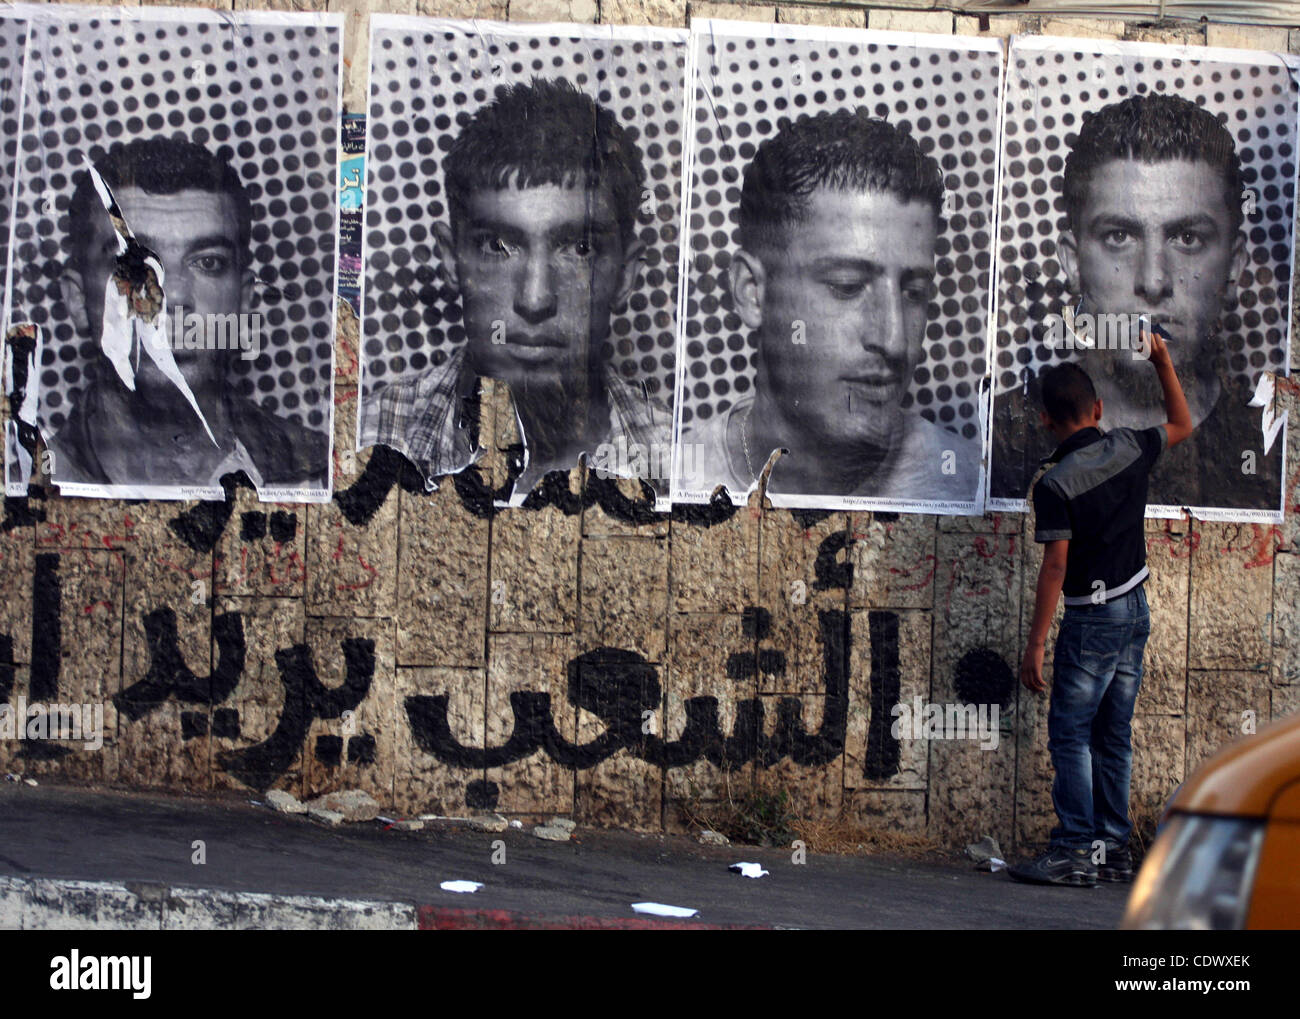 Sept. 6, 2011 - Ramallah, West Bank - A Palestinian man defaces large black and white photographs taken by French street artist JR. JR's project entails having Palestinian and Israeli portraits taken which are then printed and pasted onto walls In Israel and the West Bank, as a way of making the two Stock Photo